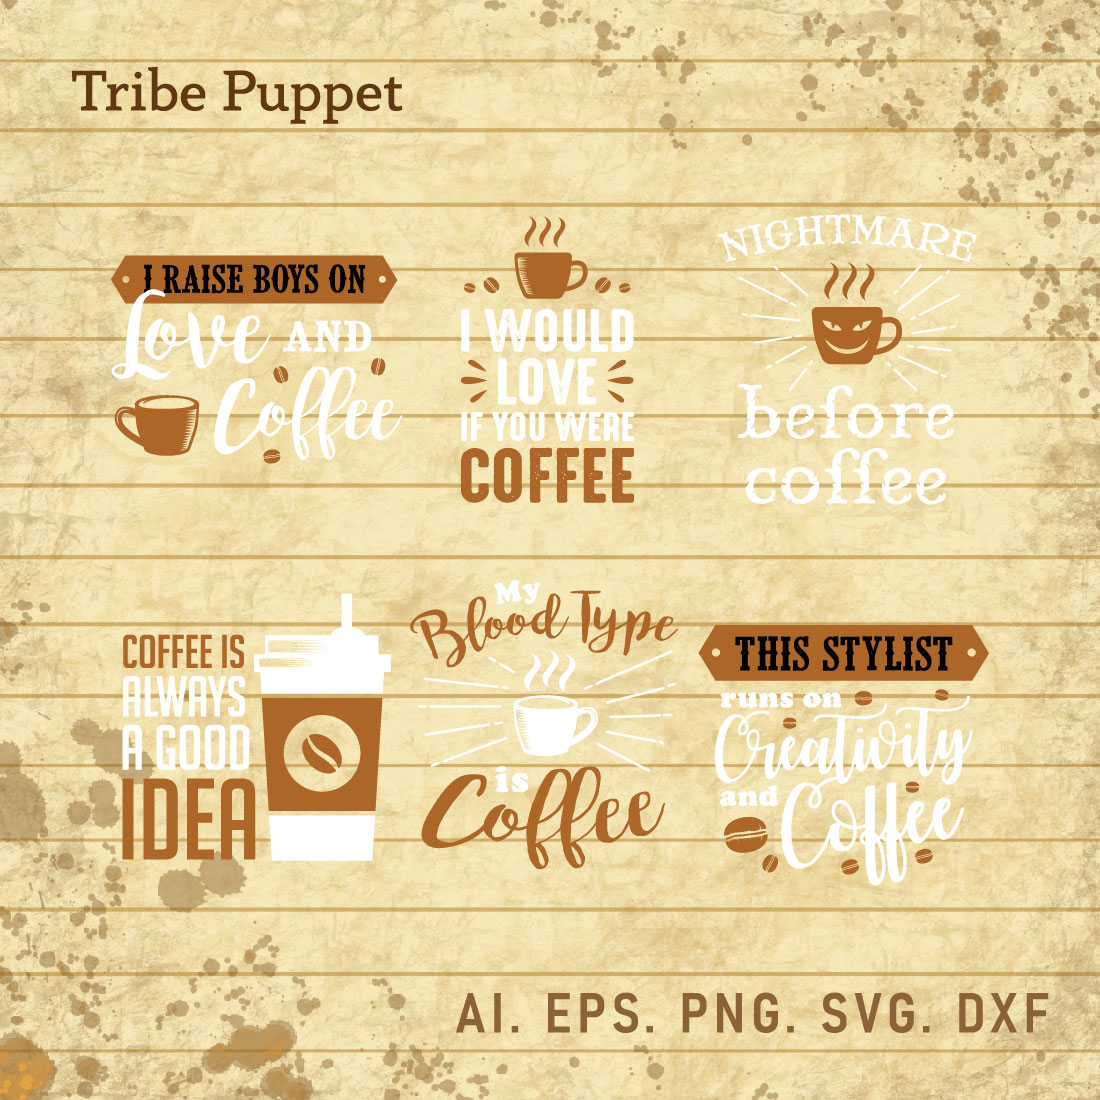 Coffee Quotes Typography 2 cover image.